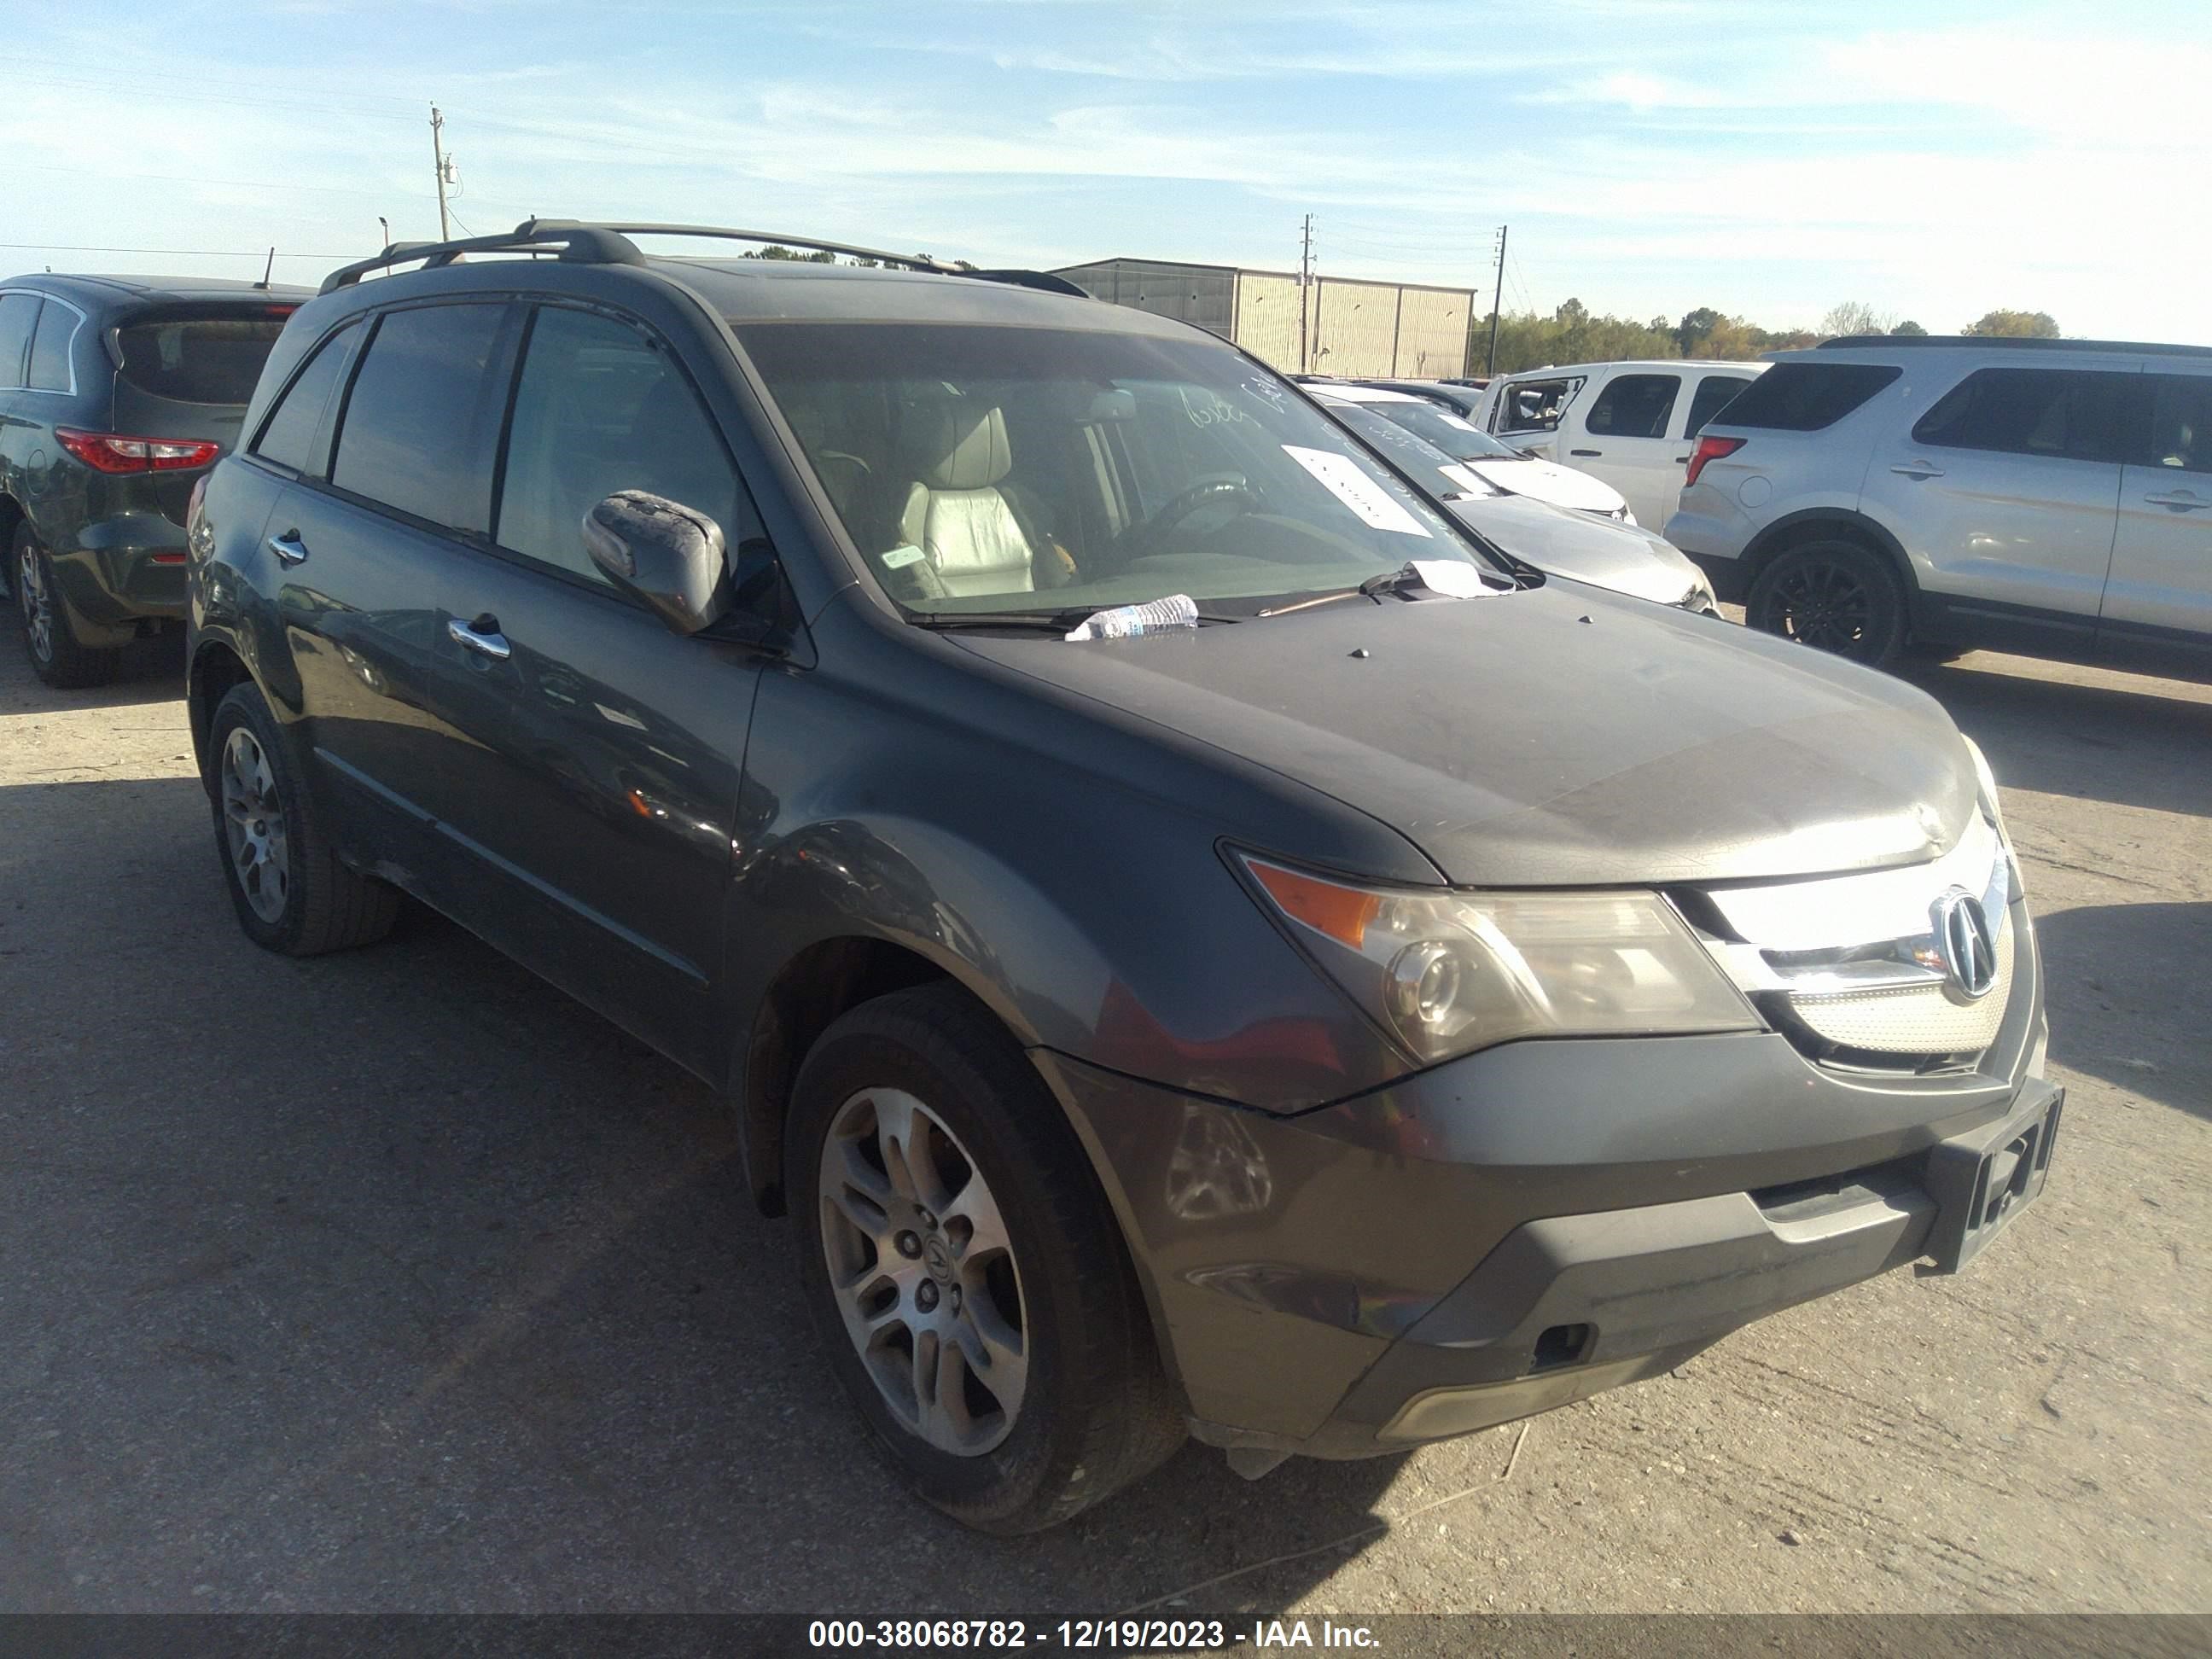 vin: 2HNYD28218H516605 2HNYD28218H516605 2008 acura mdx 3700 for Sale in 77038, 2535 West Mt. Houston Road, Houston, Texas, USA